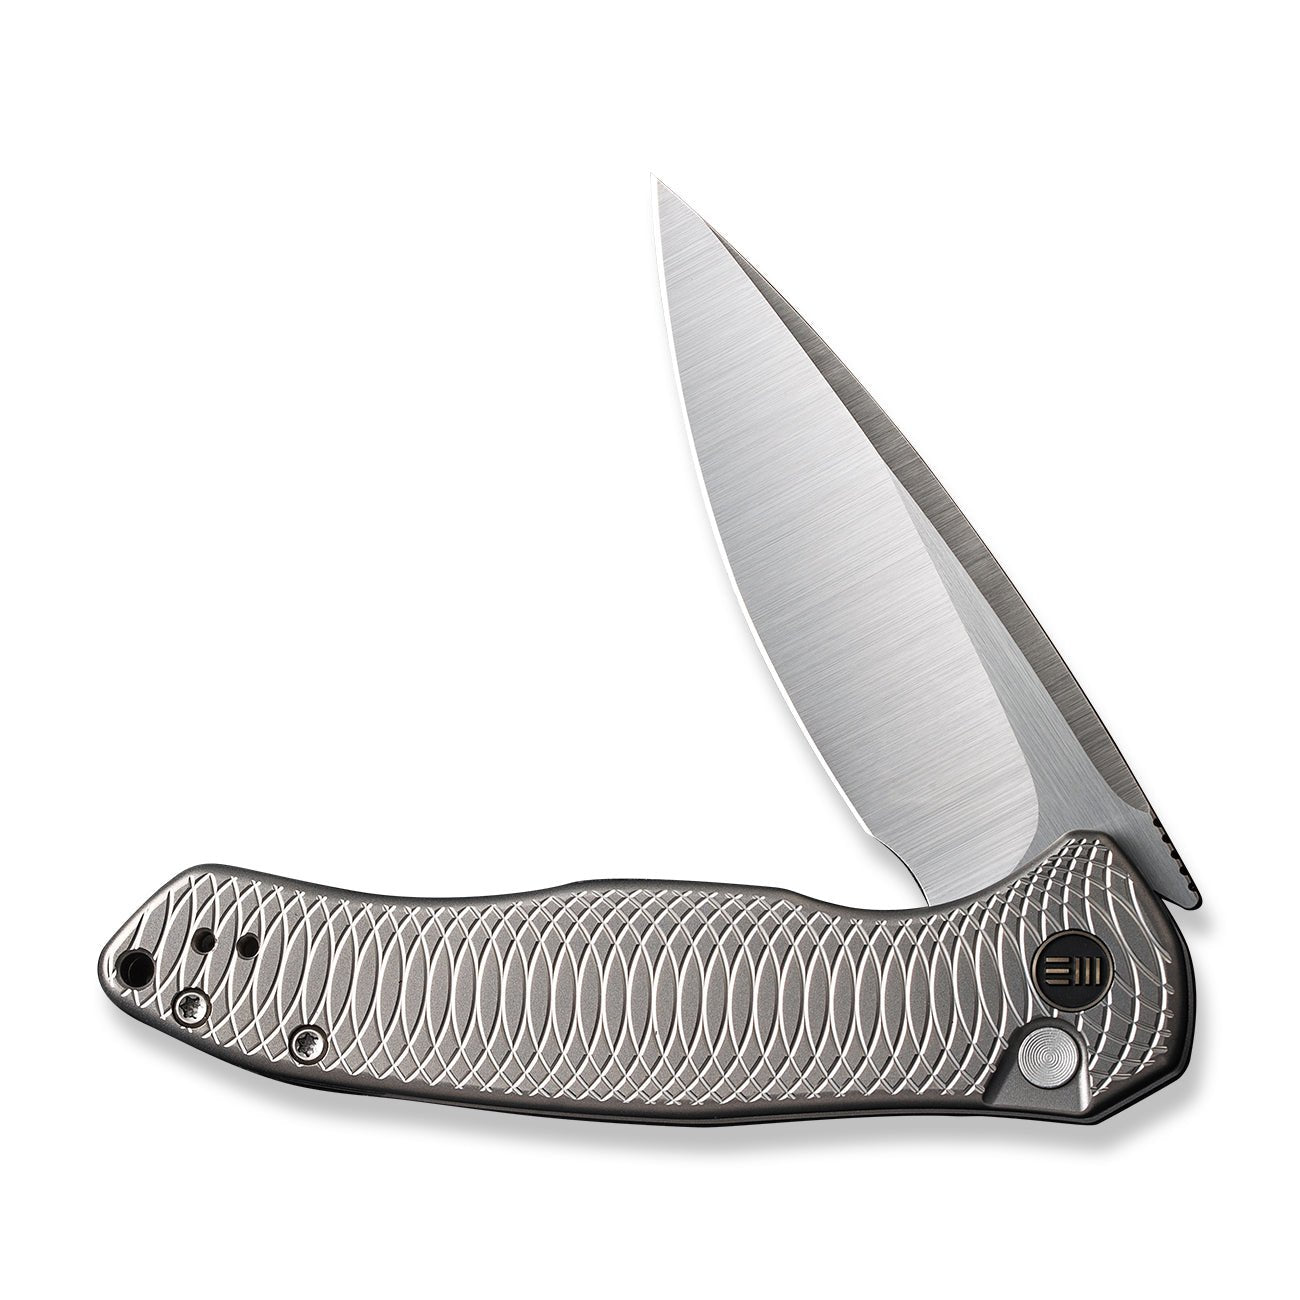 WE KNIFE WE19002M-2 Kitefin (CPM 20CV) (Limited Edition)